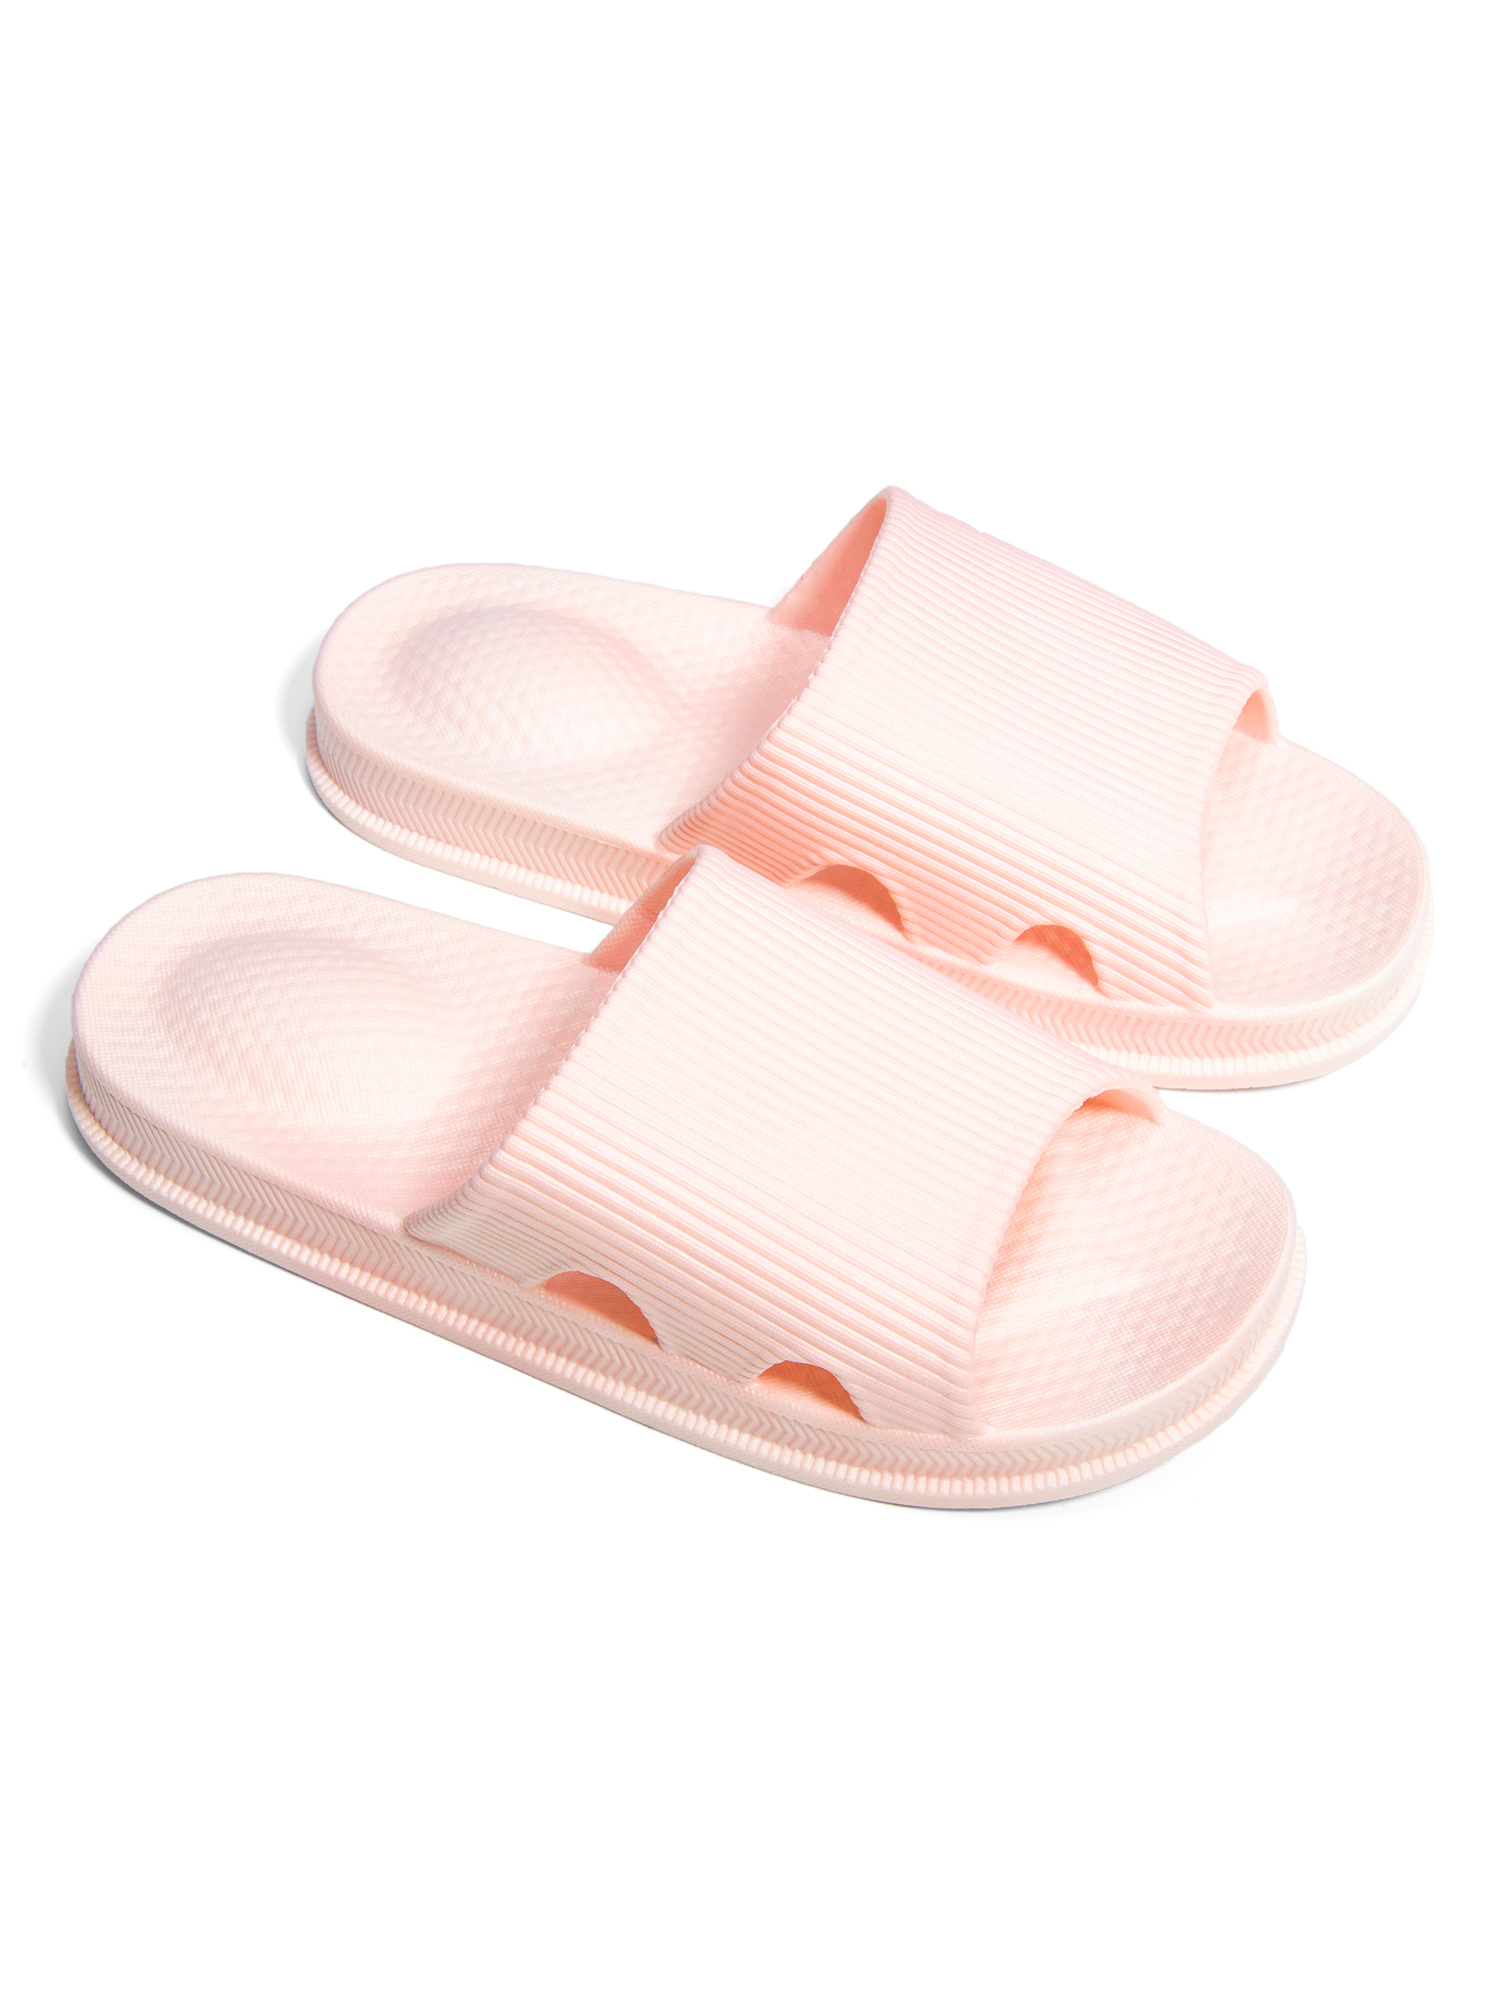 Women Indoor Shower Slippers Bath Shoe Non-Slip Shower Sandals Shoes Home  Beach Sandals Slippers Soft Foams Sole Pool Shoes for Bathroom - image 1 of 8